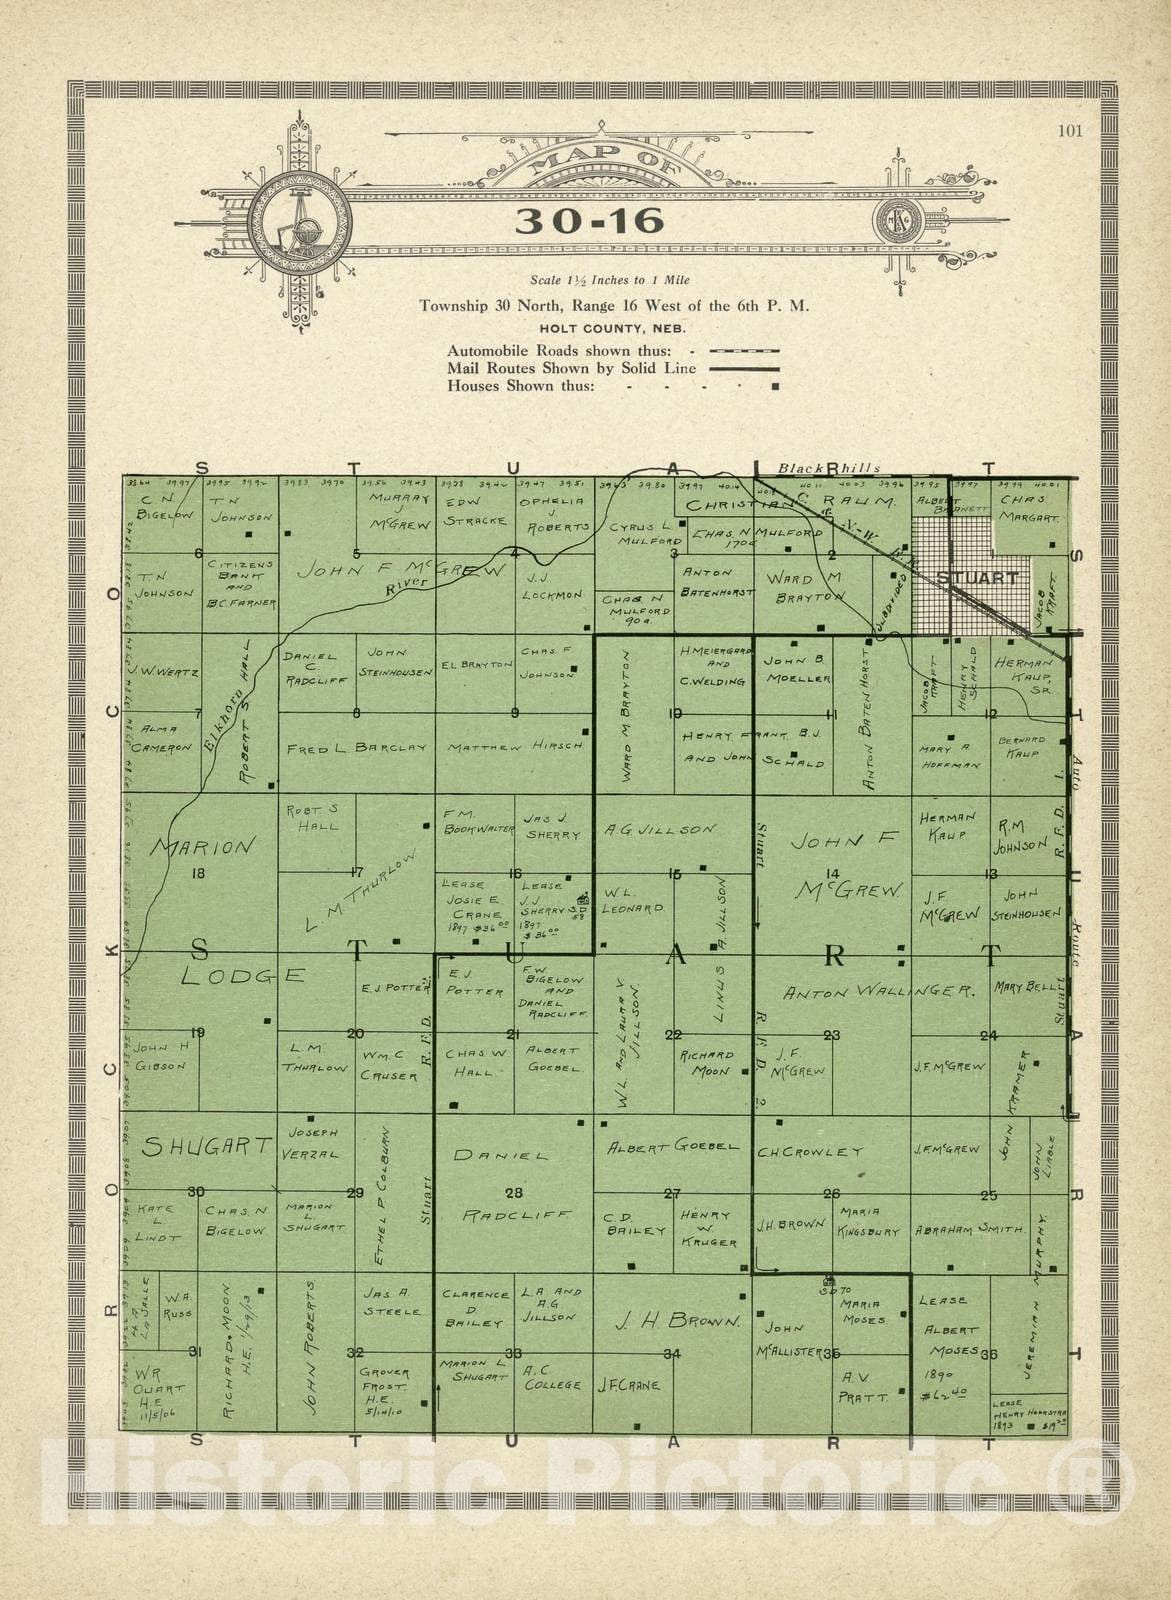 Historic 1915 Map - Atlas and plat Book of Holt County, Nebraska - Map of 30-16 - Standard Atlas and Directory of Holt County, Nebraska